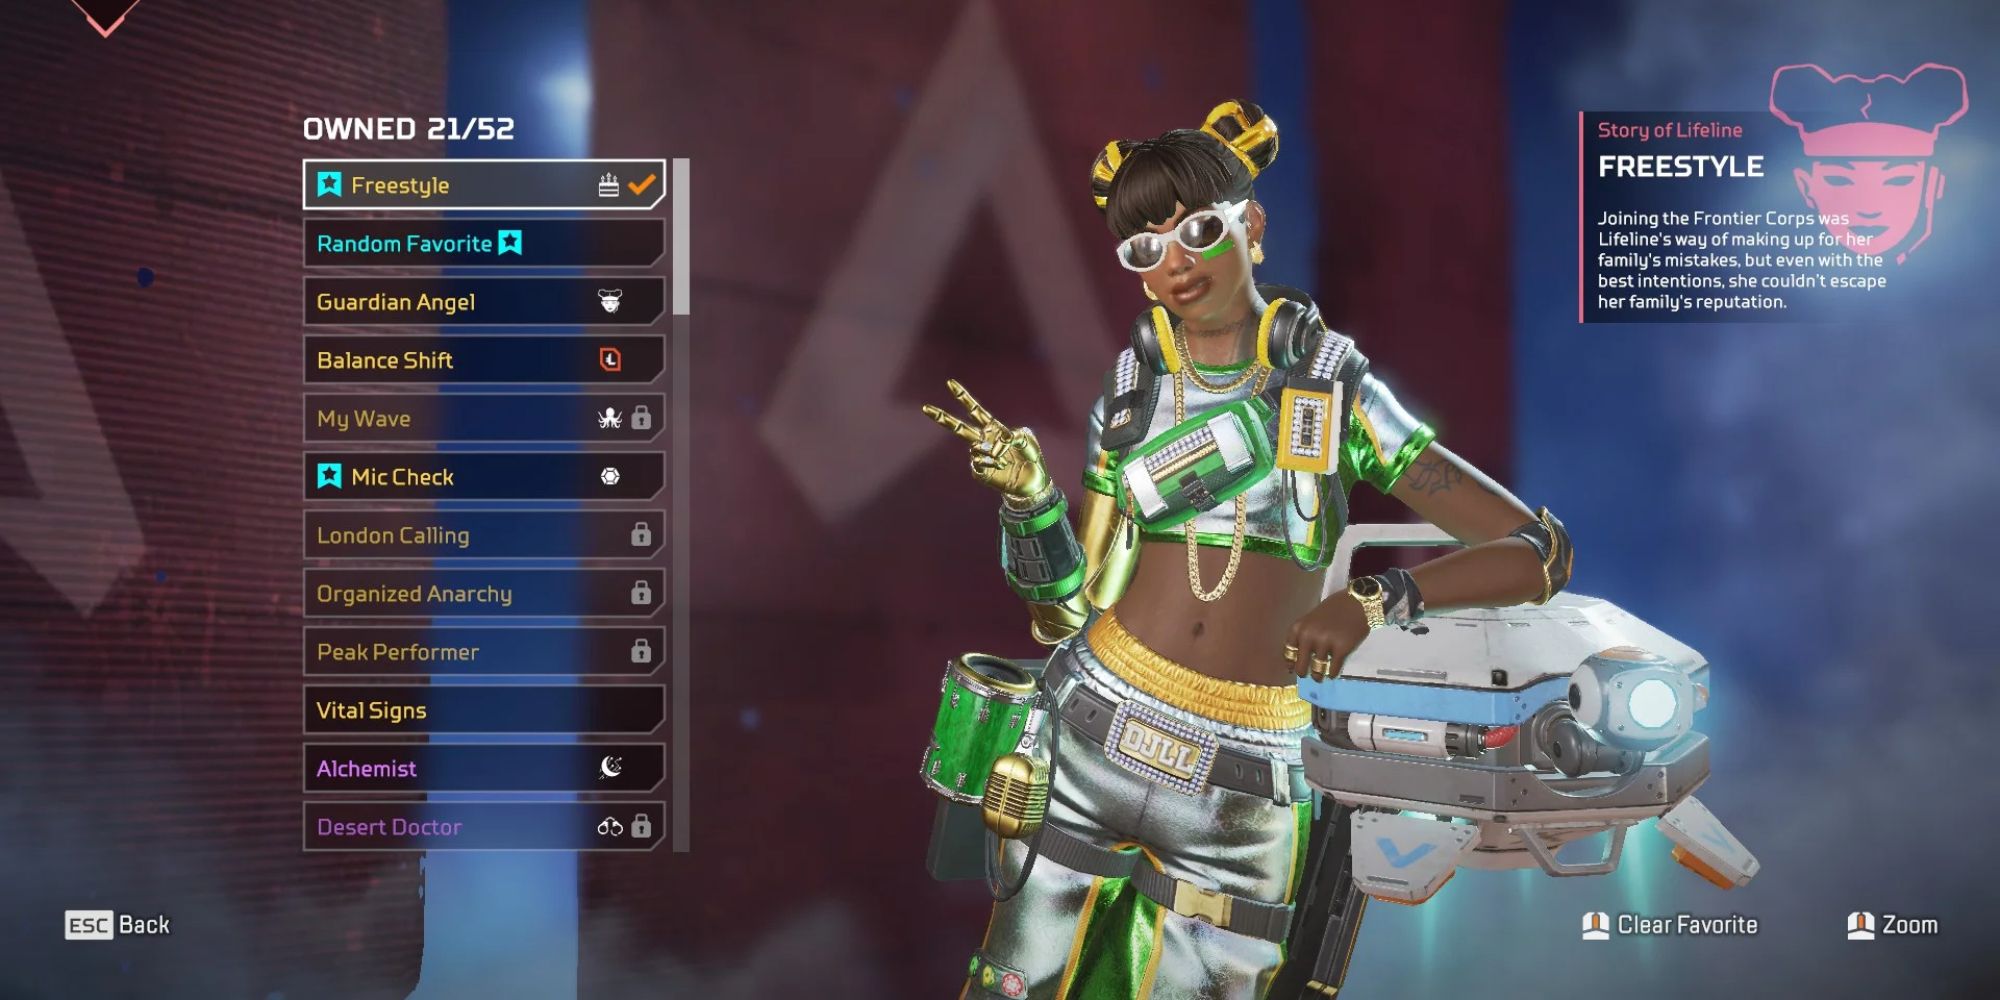 An image of Lifeline's Freestyle skin from Apex Legends.